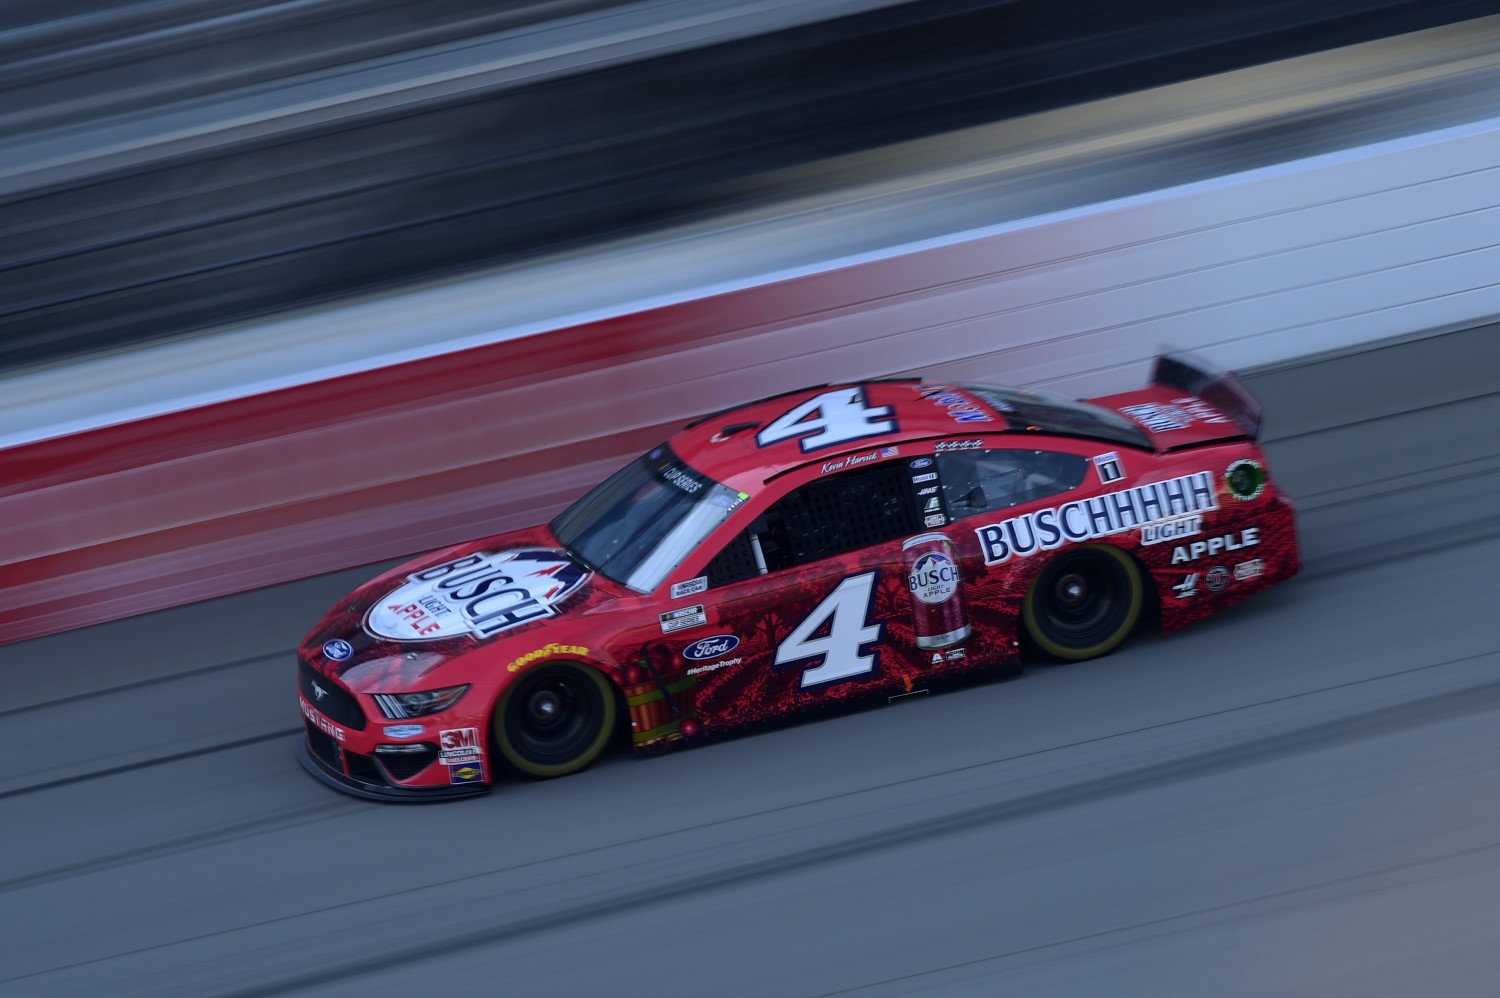 Harvick led most of the afternoon